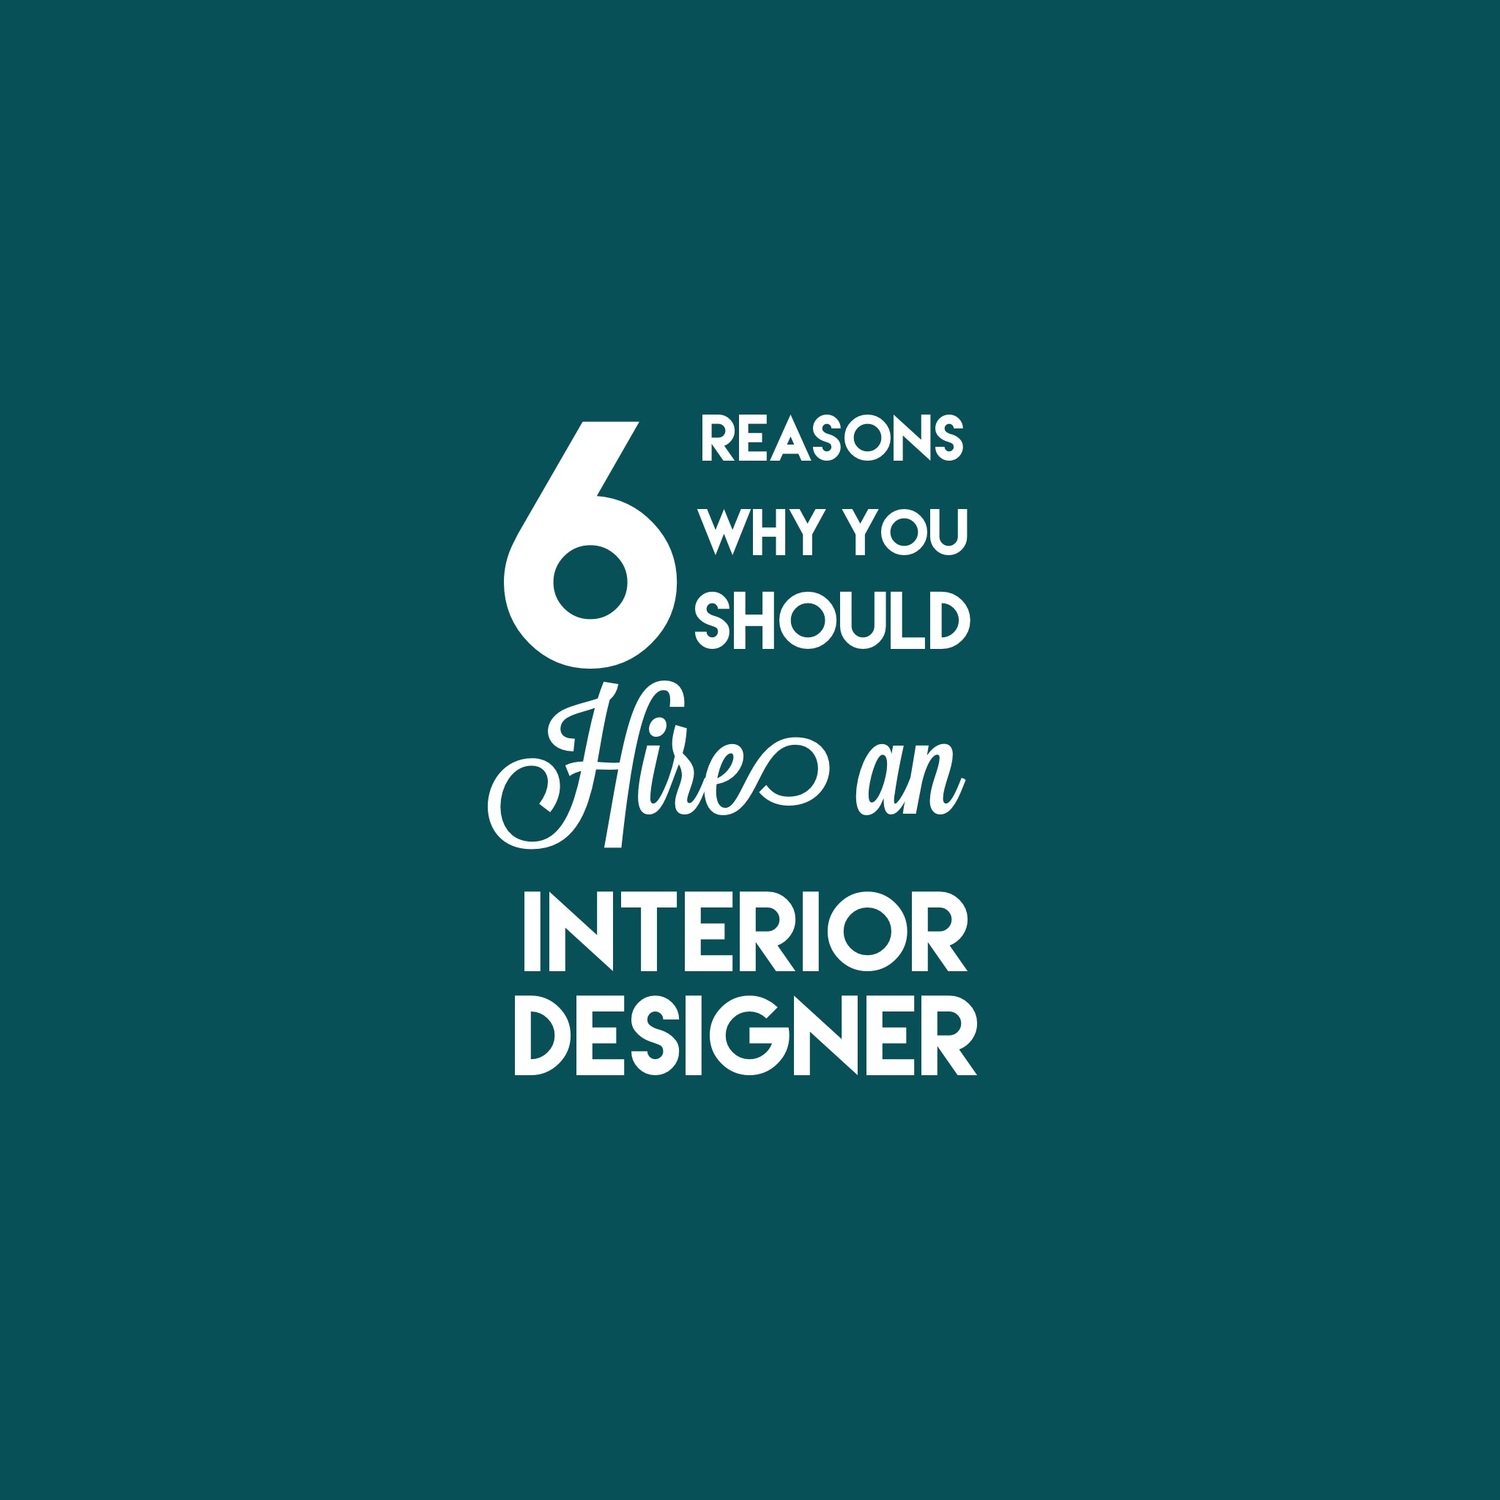 The Reasons Why You Should Hire An Interior Designer